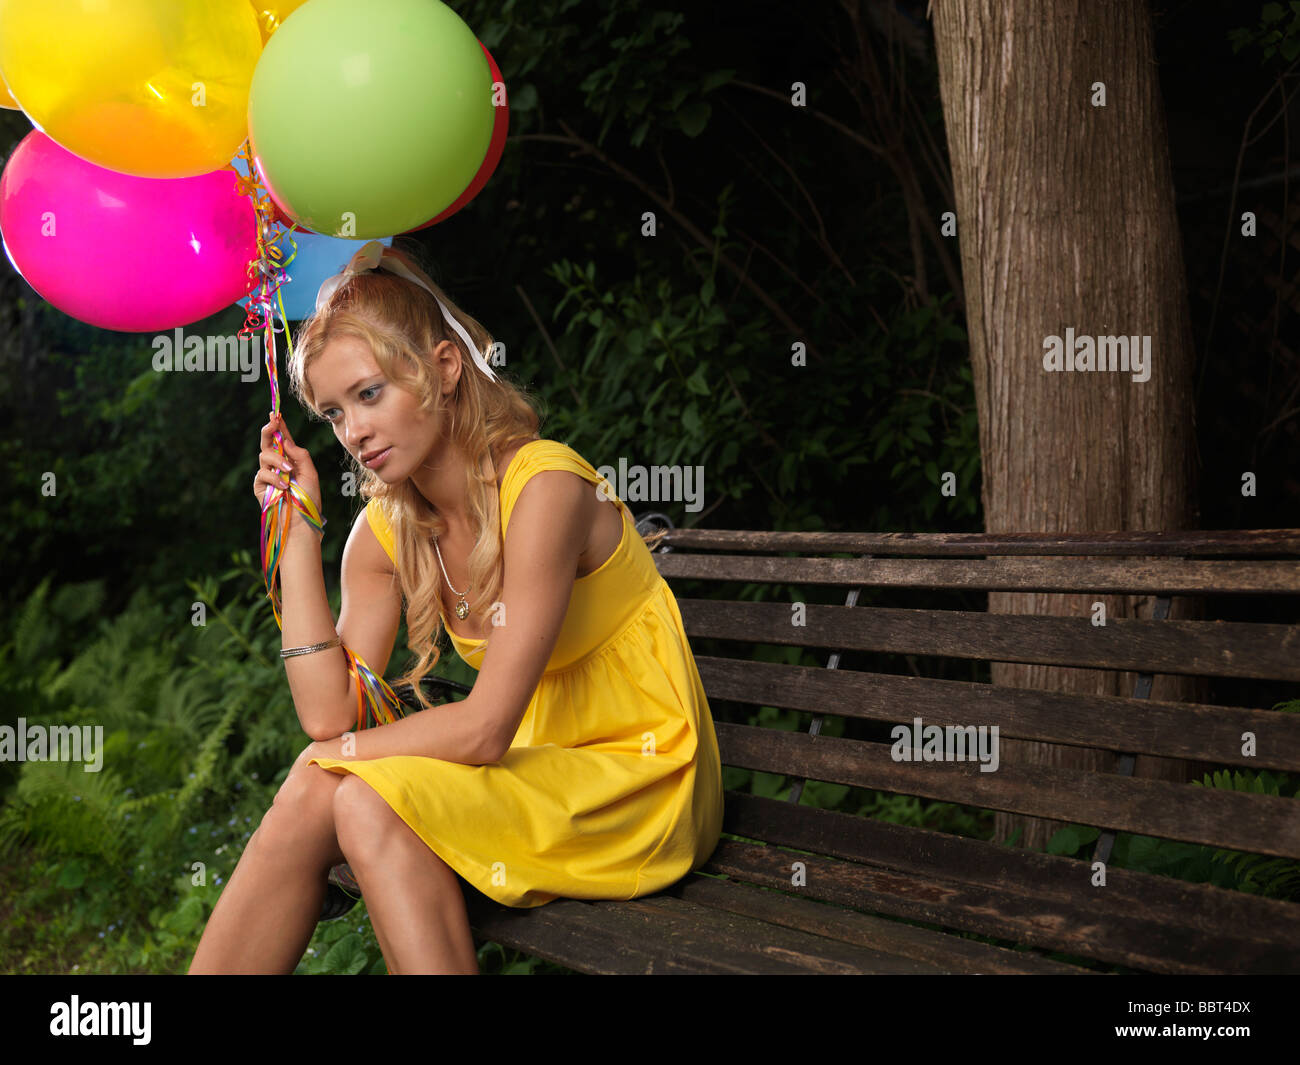 Young sad woman sitting on a bench with a bunch of colorful balloons Stock Photo